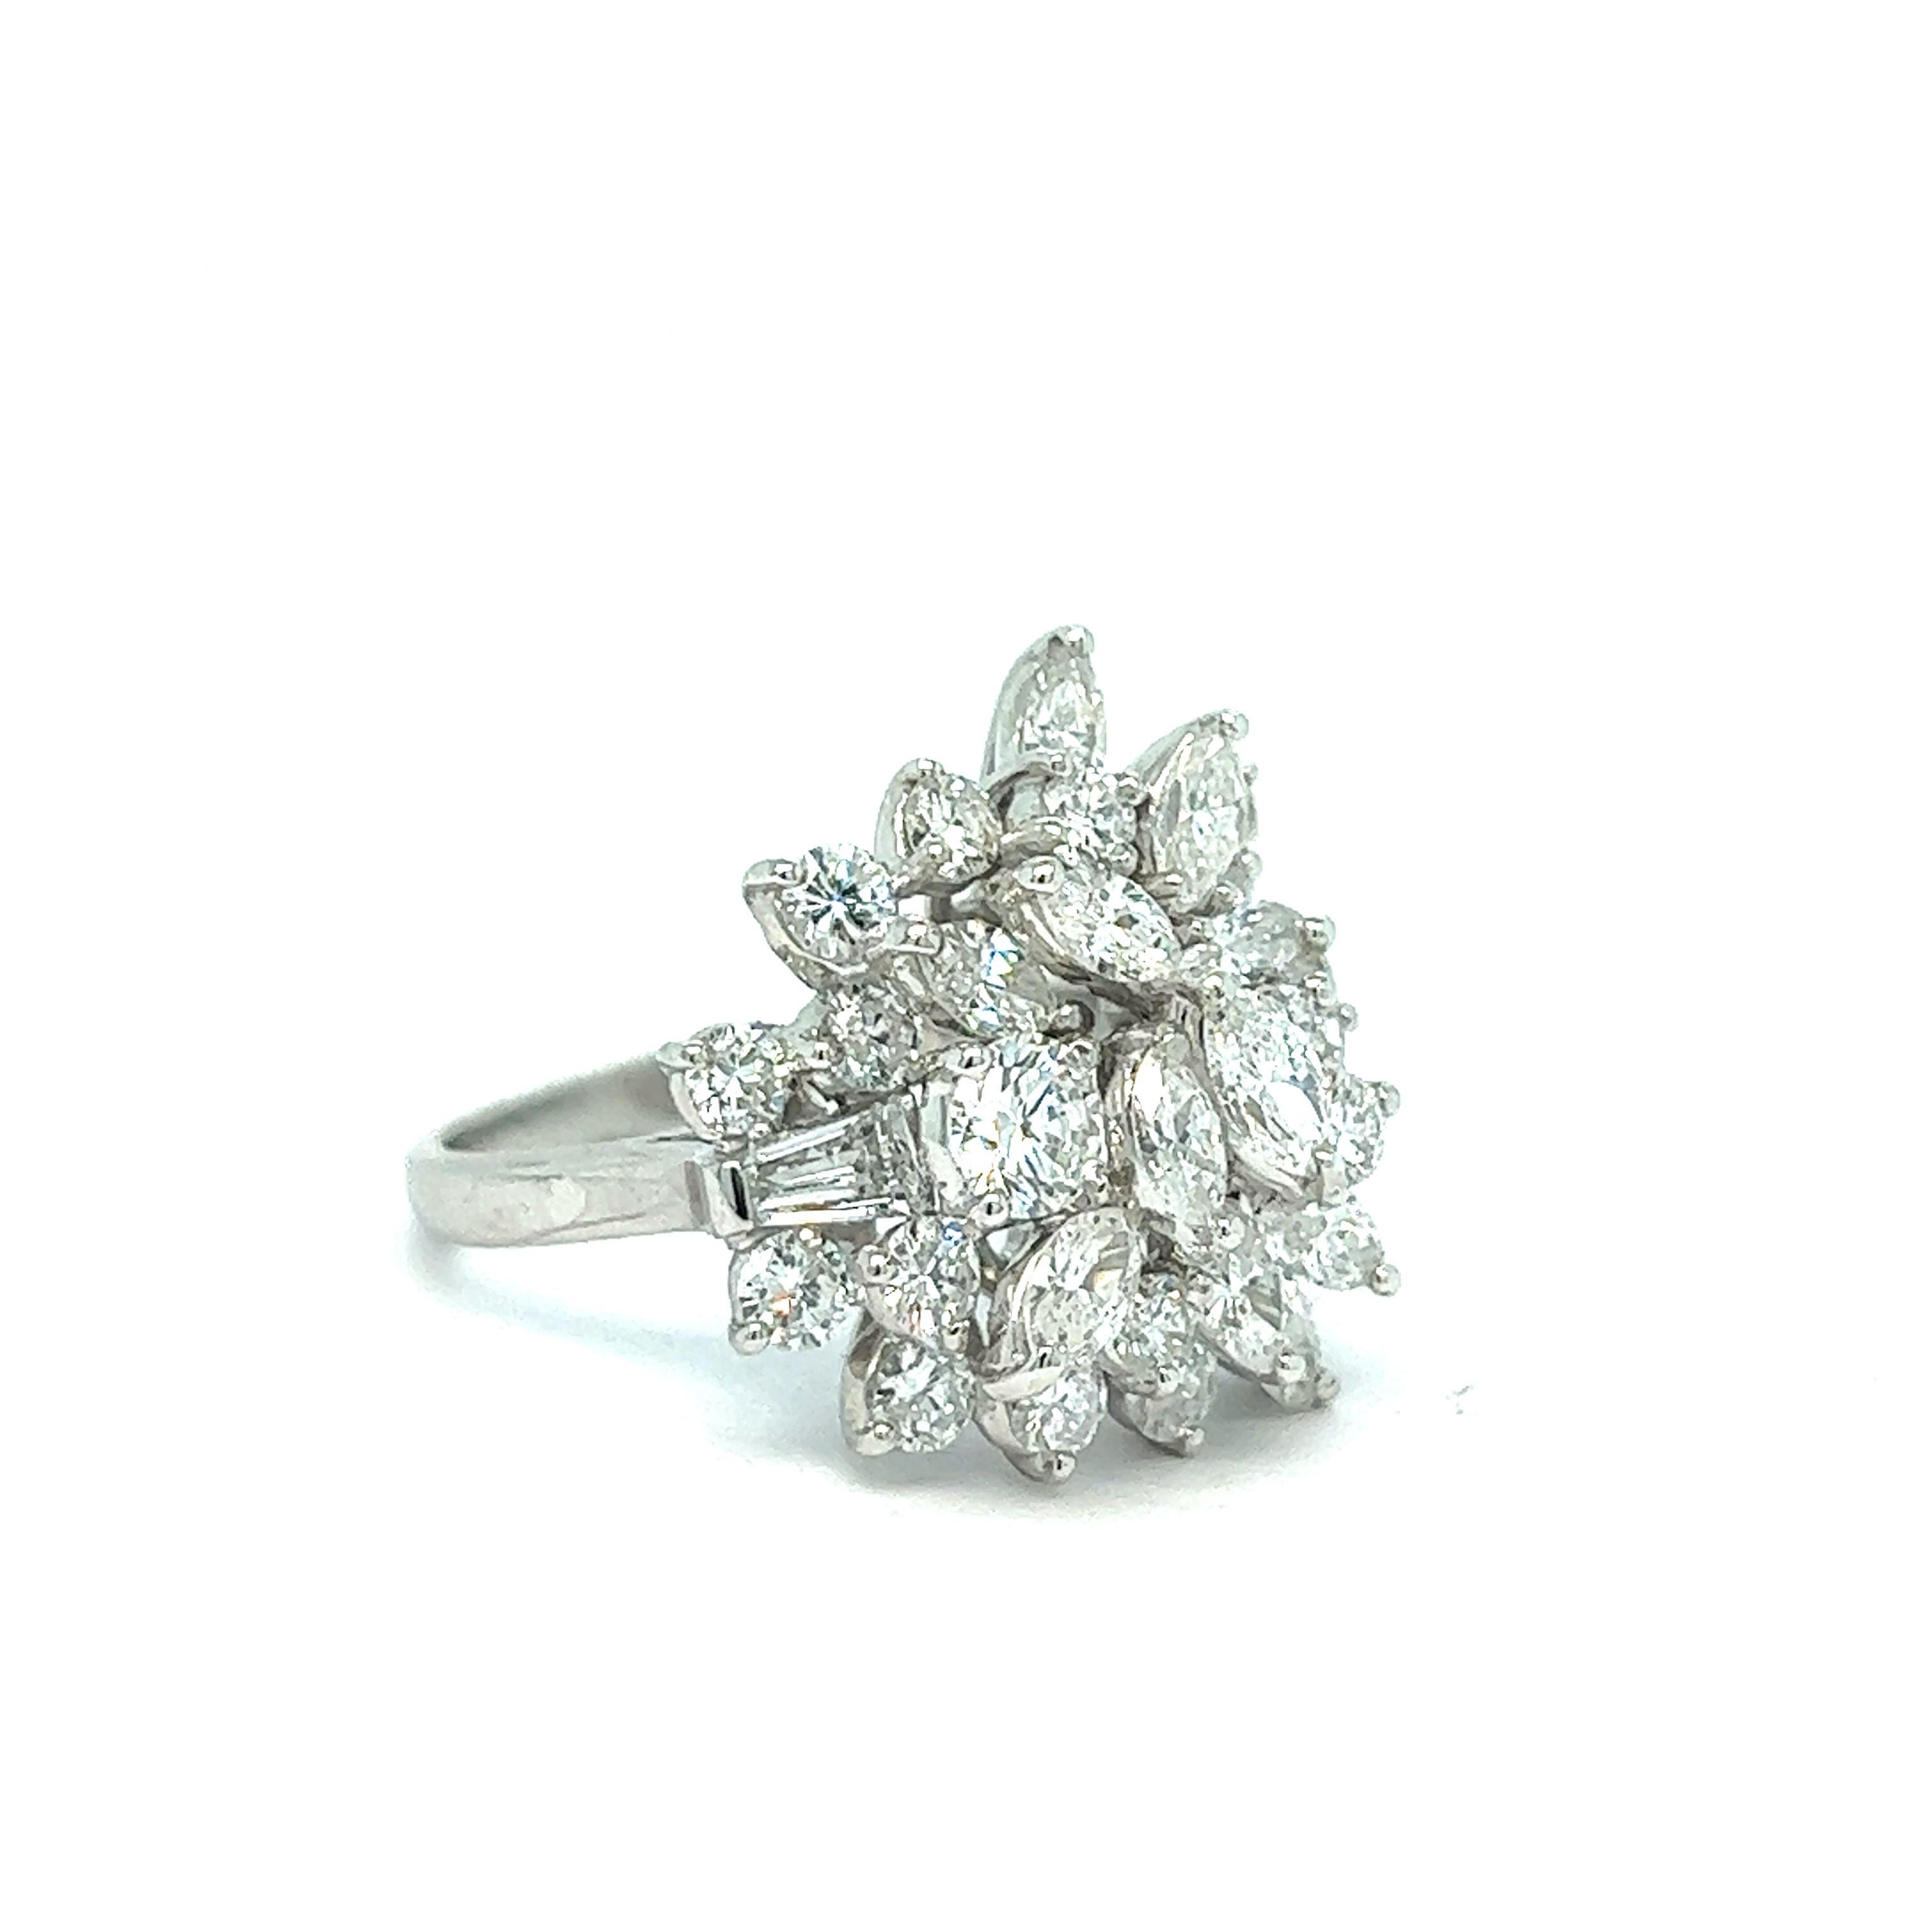 Harry Winston diamond platinum ring 

Beautiful and stunning ring made out of Marquise, round, and tapered baguette diamonds set in platinum; marked Winston, Pt950, PLAT

Size: 8 US
Total weight: 11.3 grams